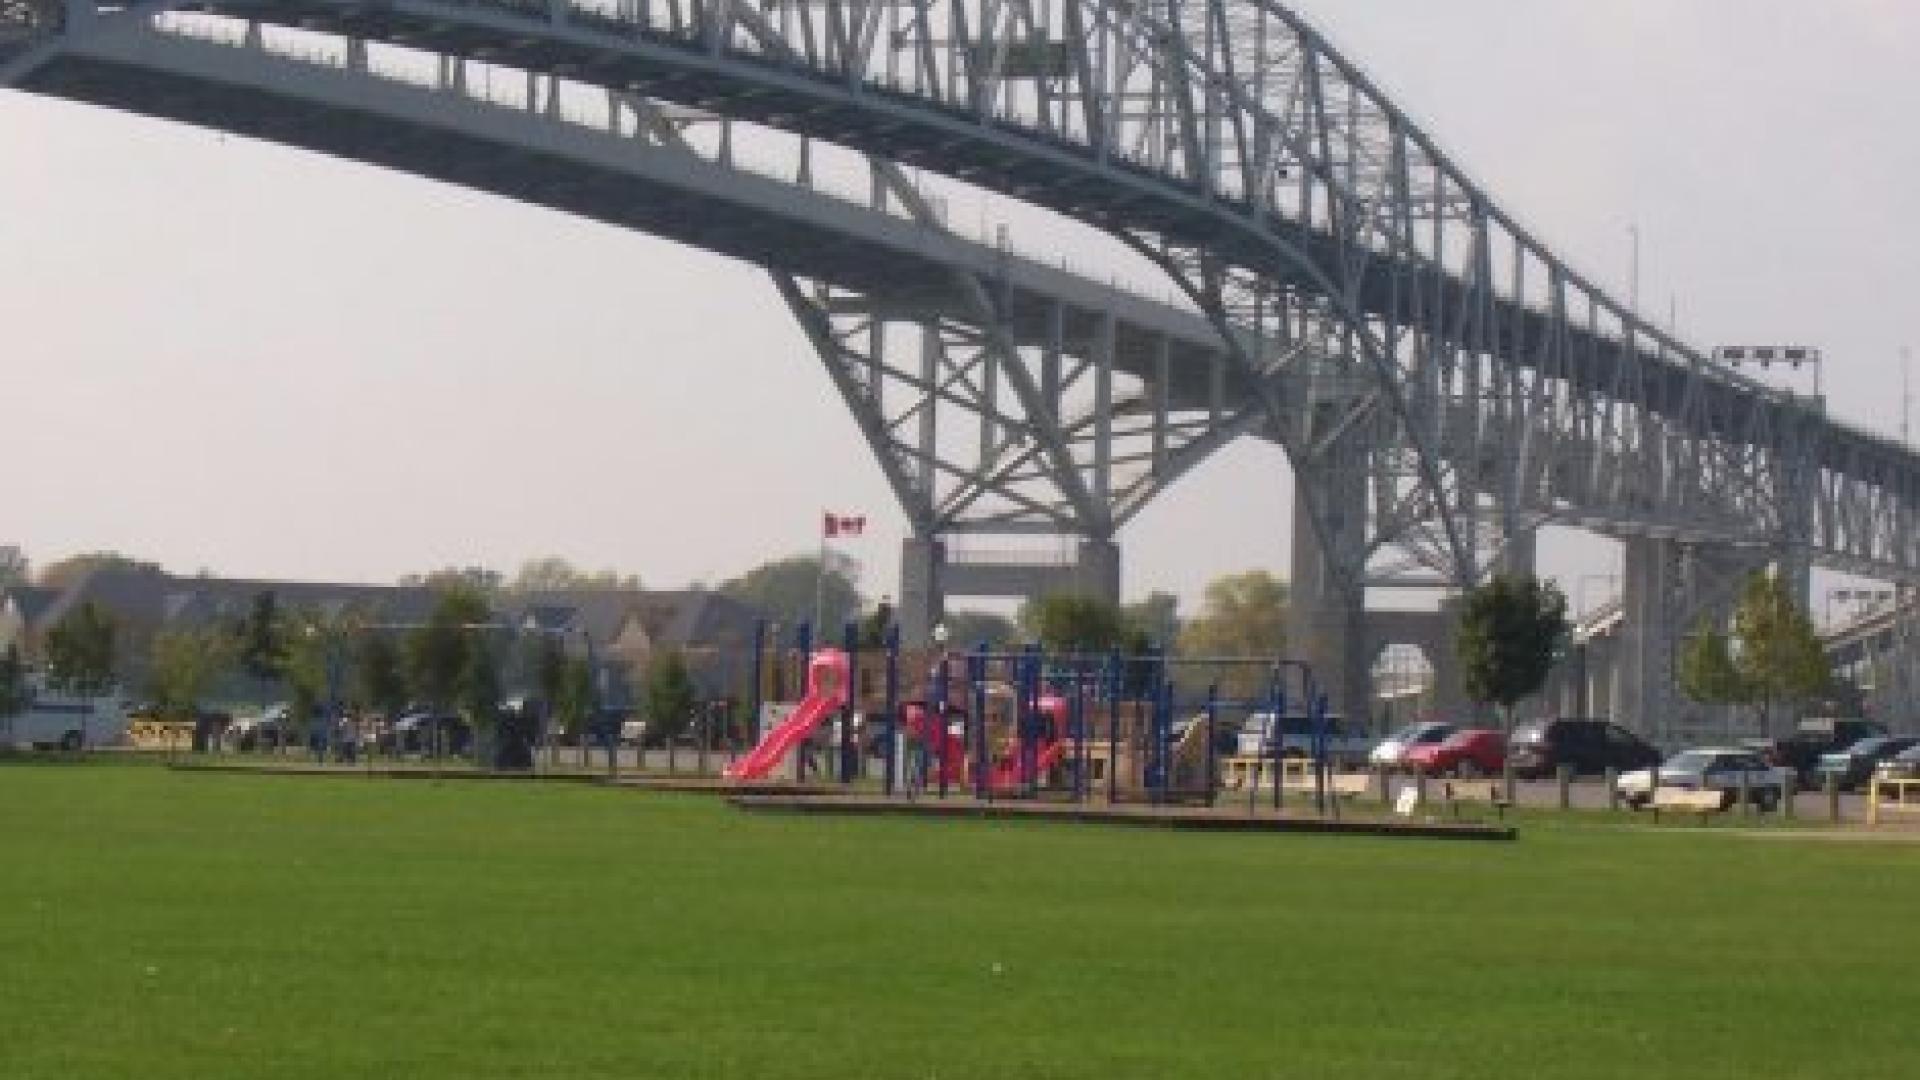 Small playground with a red jungle gym. There is a bridge in the background.